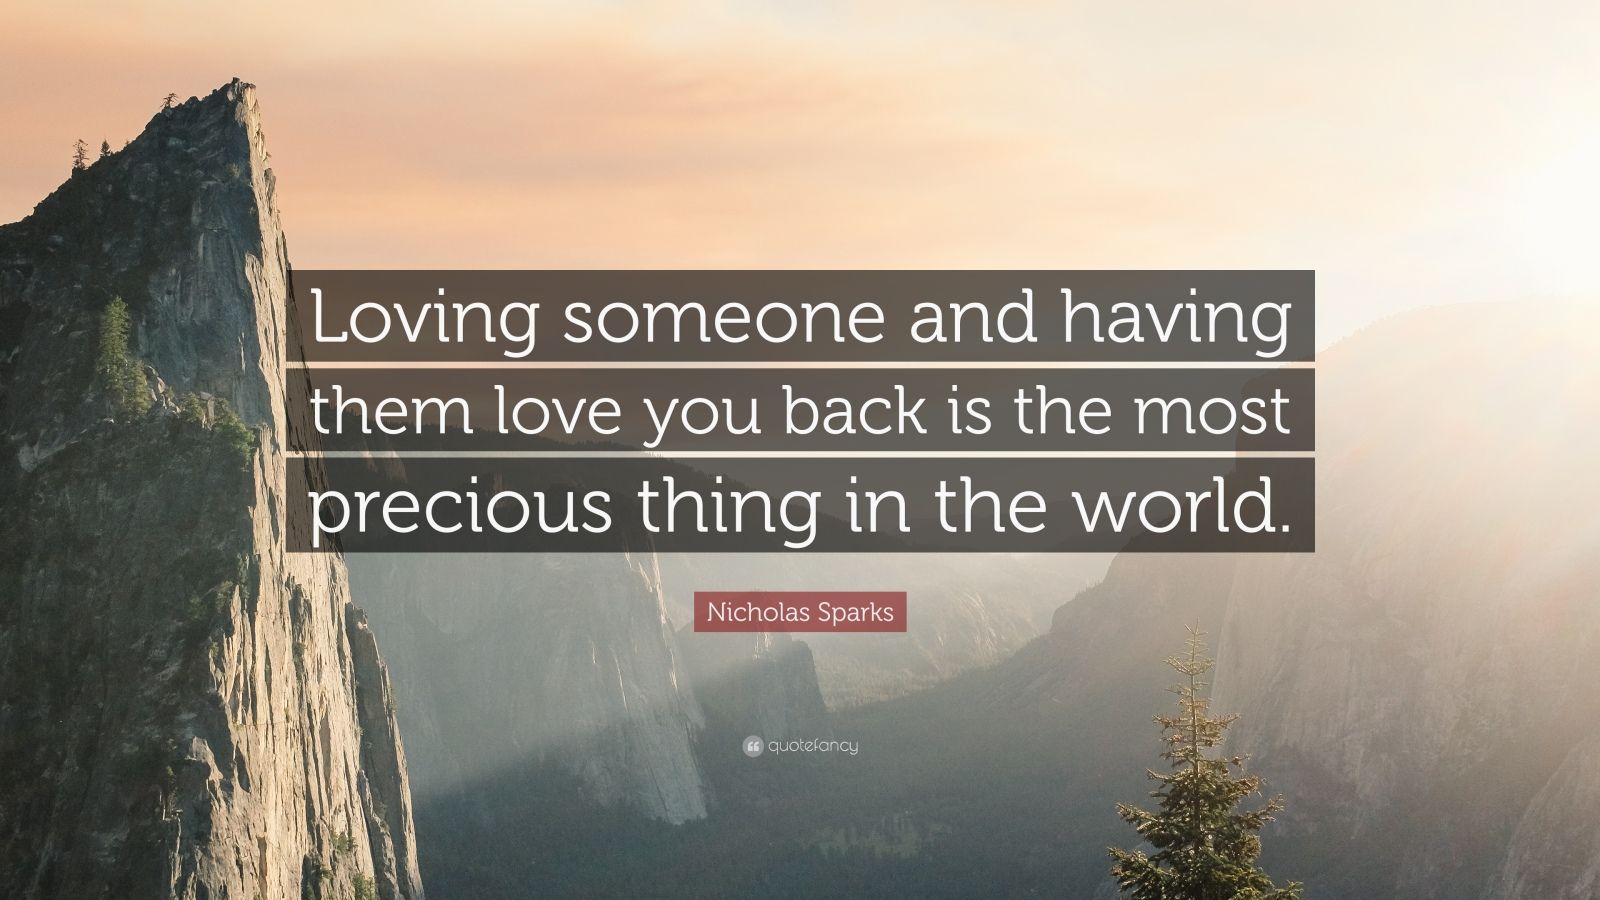 Nicholas Sparks Quote “Loving someone and having them love you back is the most